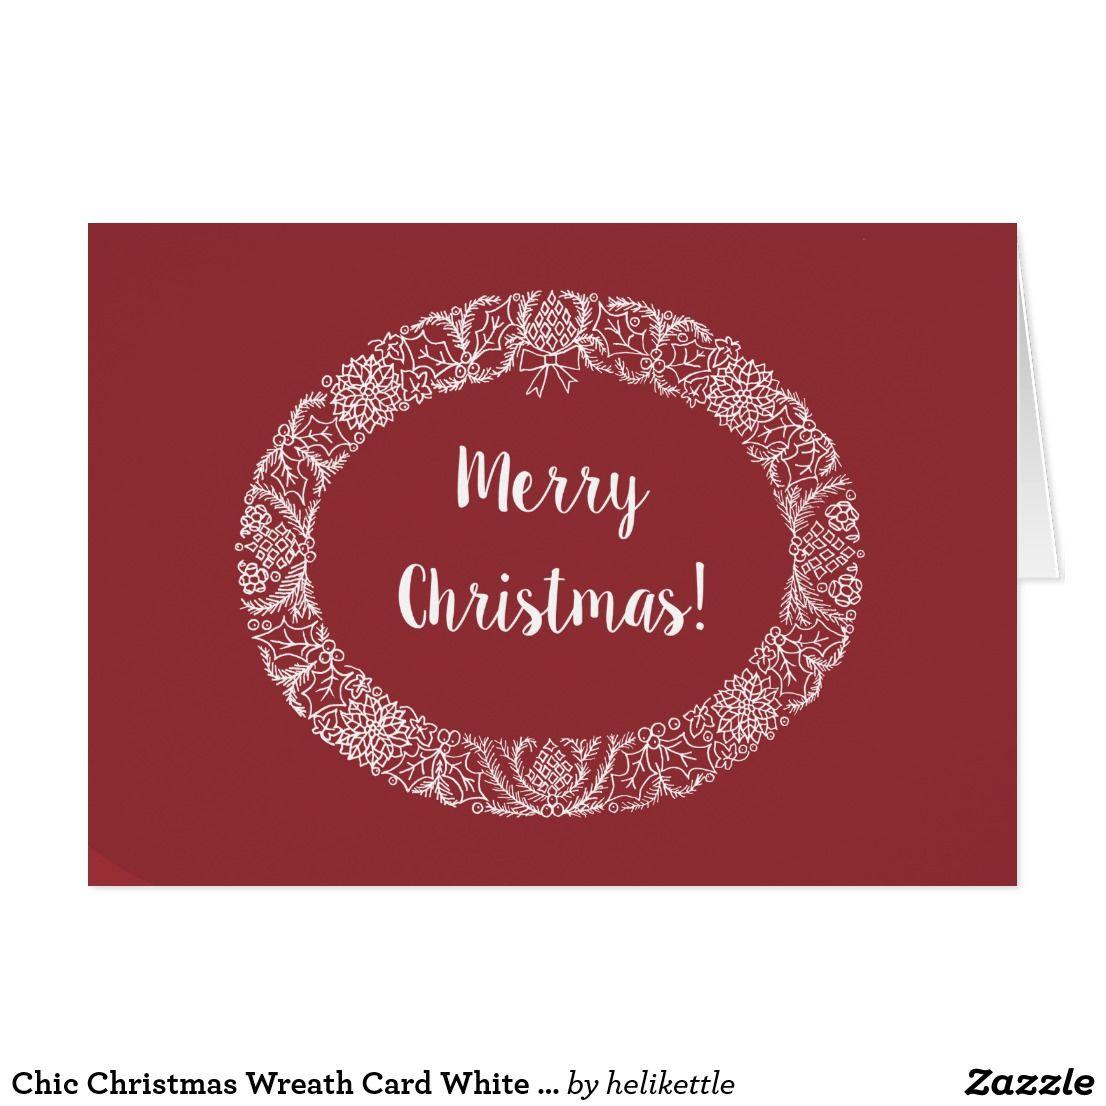 Deep Red and White Logo - Chic Christmas Wreath Card White on Deep Red. Zazzles Christmas